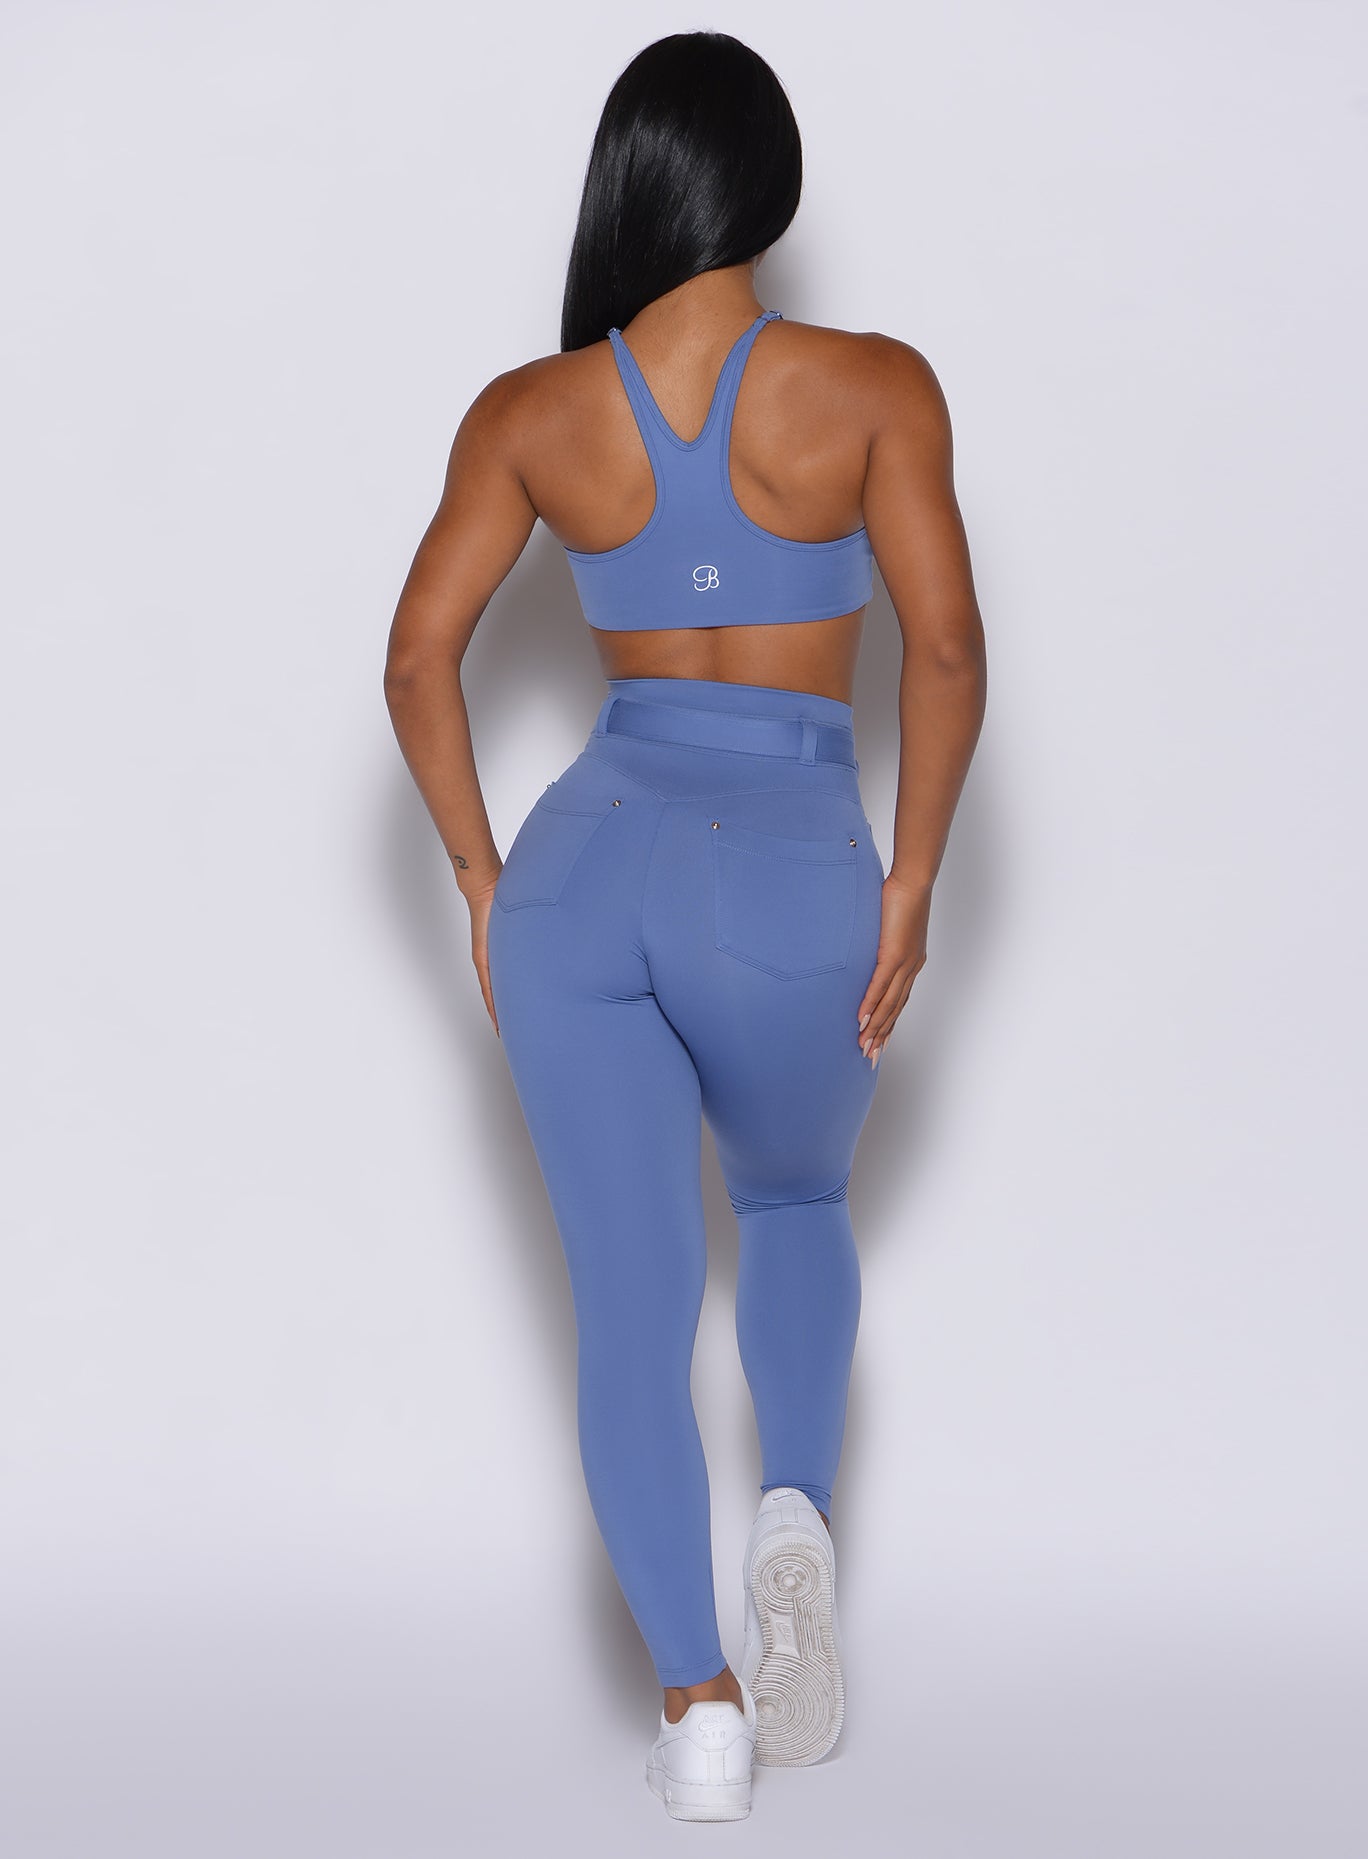 back profile view of a model wearing our peach bottoms leggings in denim blue color along with the matching sports bra